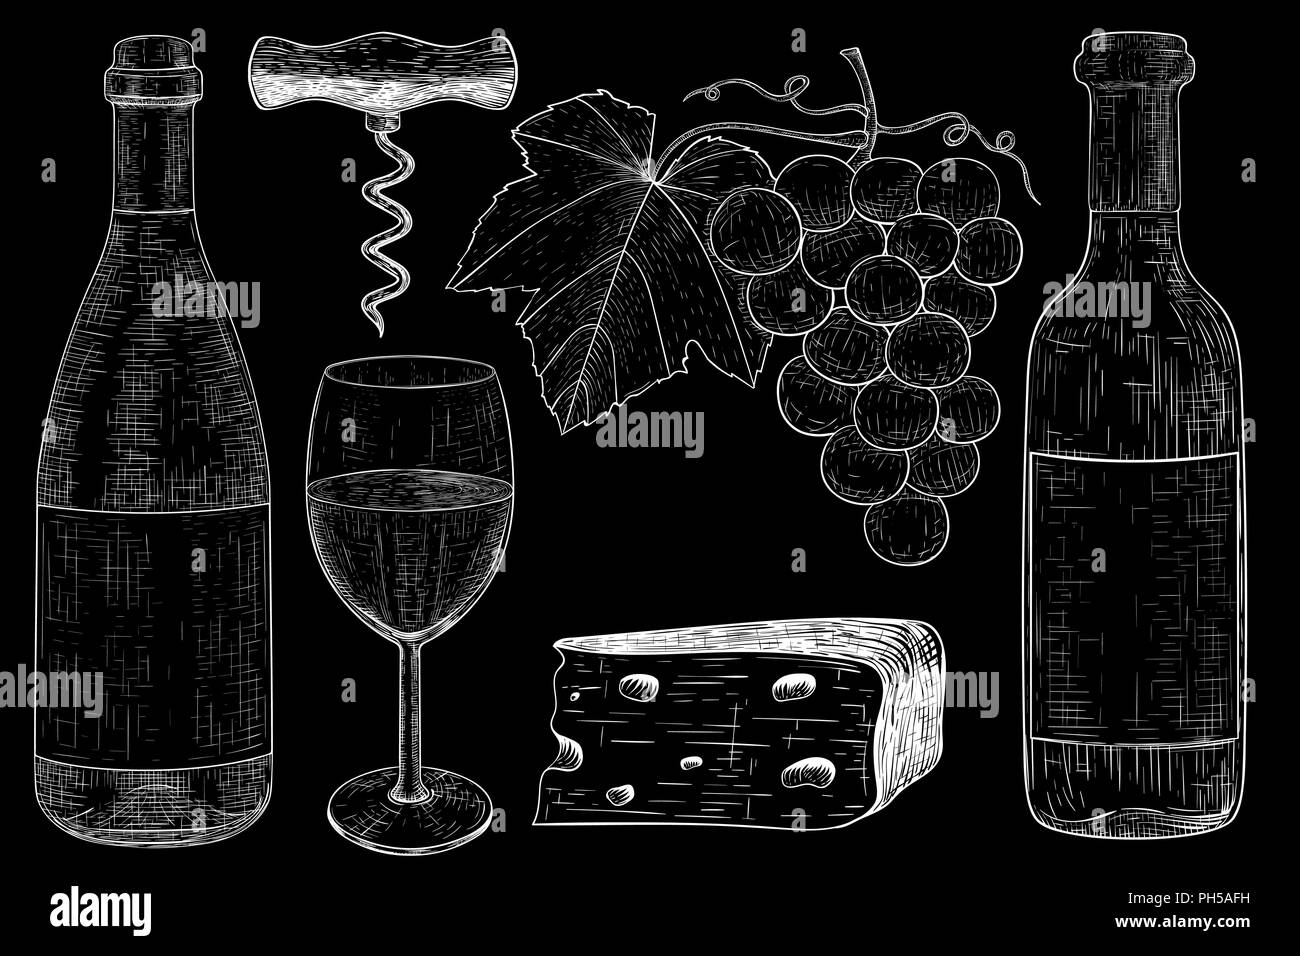 Wine set. Botlle of wine, glass, grapes, cheese, corkscrew. Hand drawn sketch. Vintage style. Stock Vector